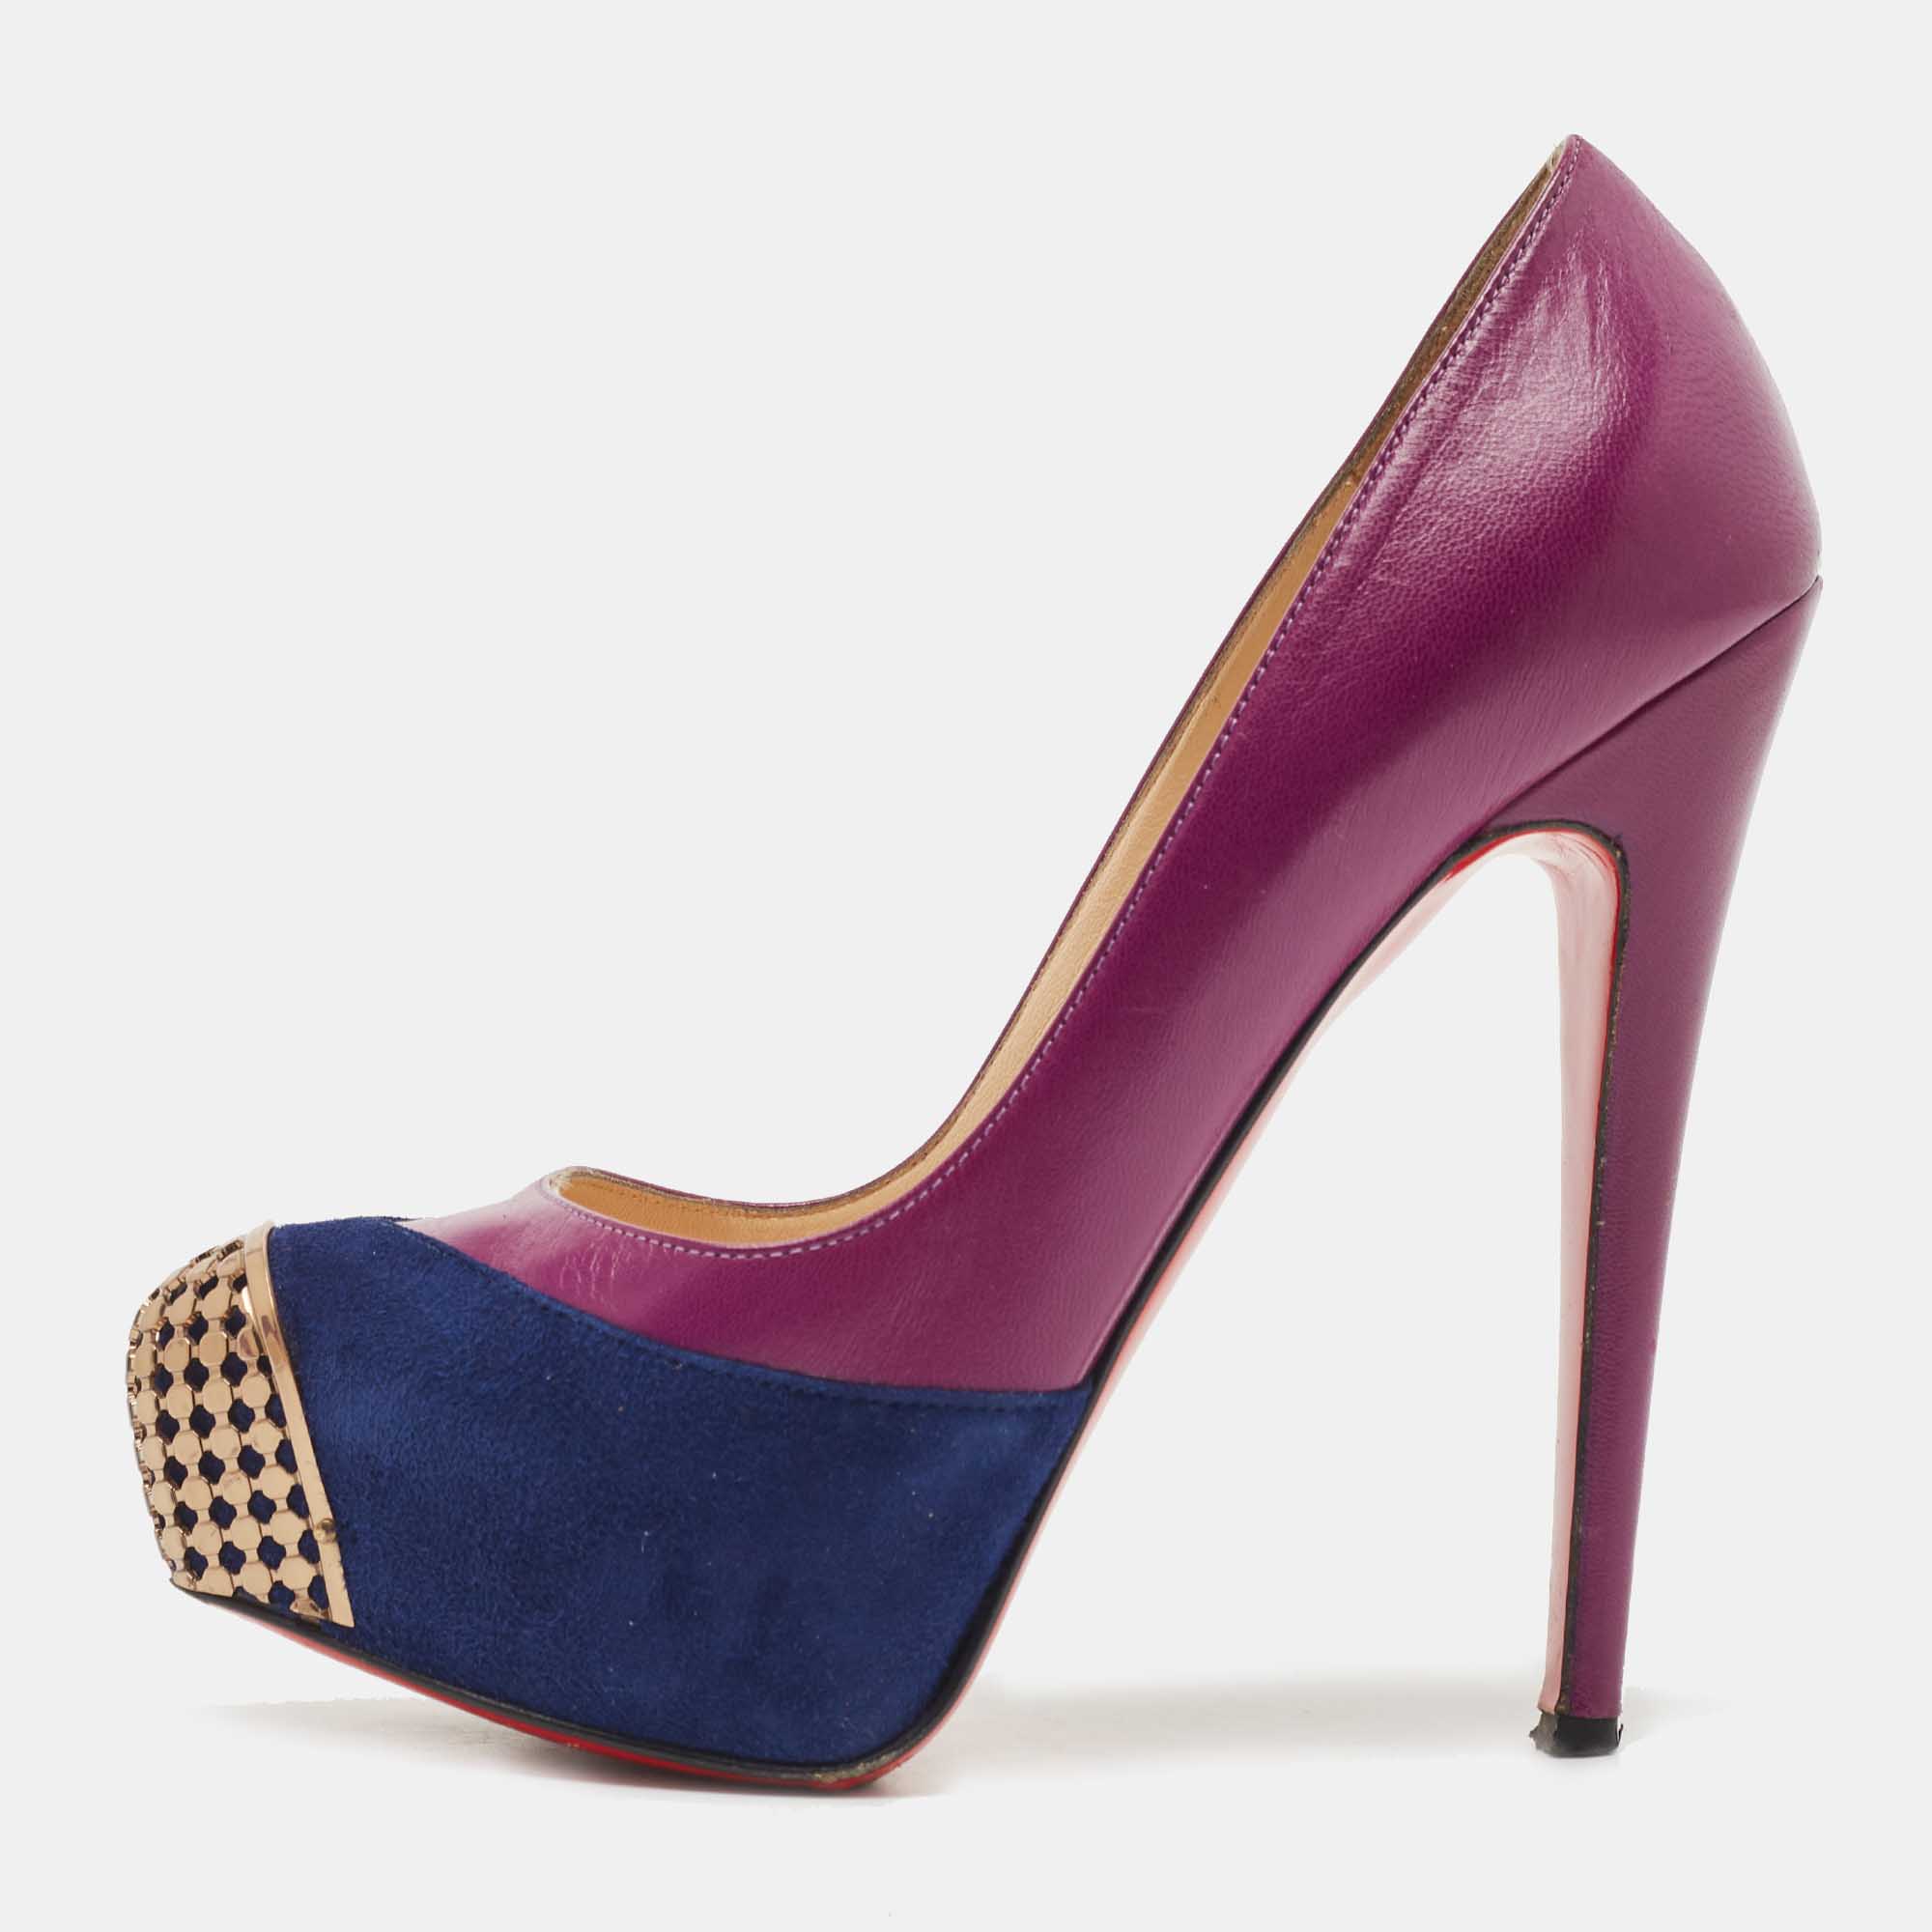 Pre-owned Christian Louboutin Purple Suede And Leather Maggie Platform Pumps Size 36.5